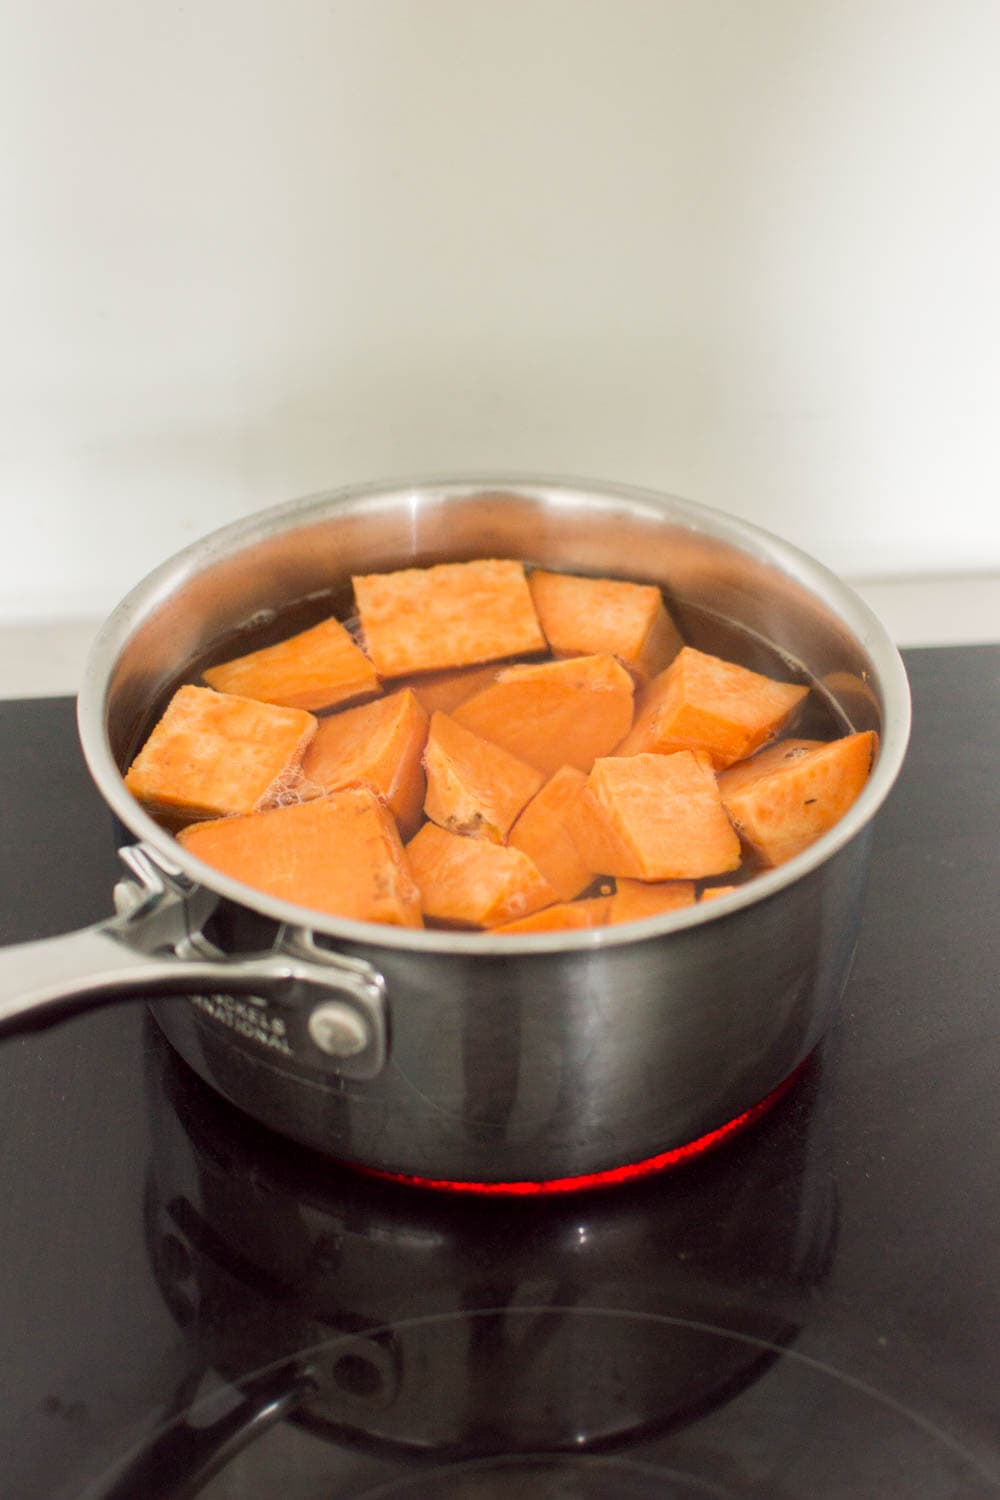 Cubed sweet potatoes in a pot of boiling water